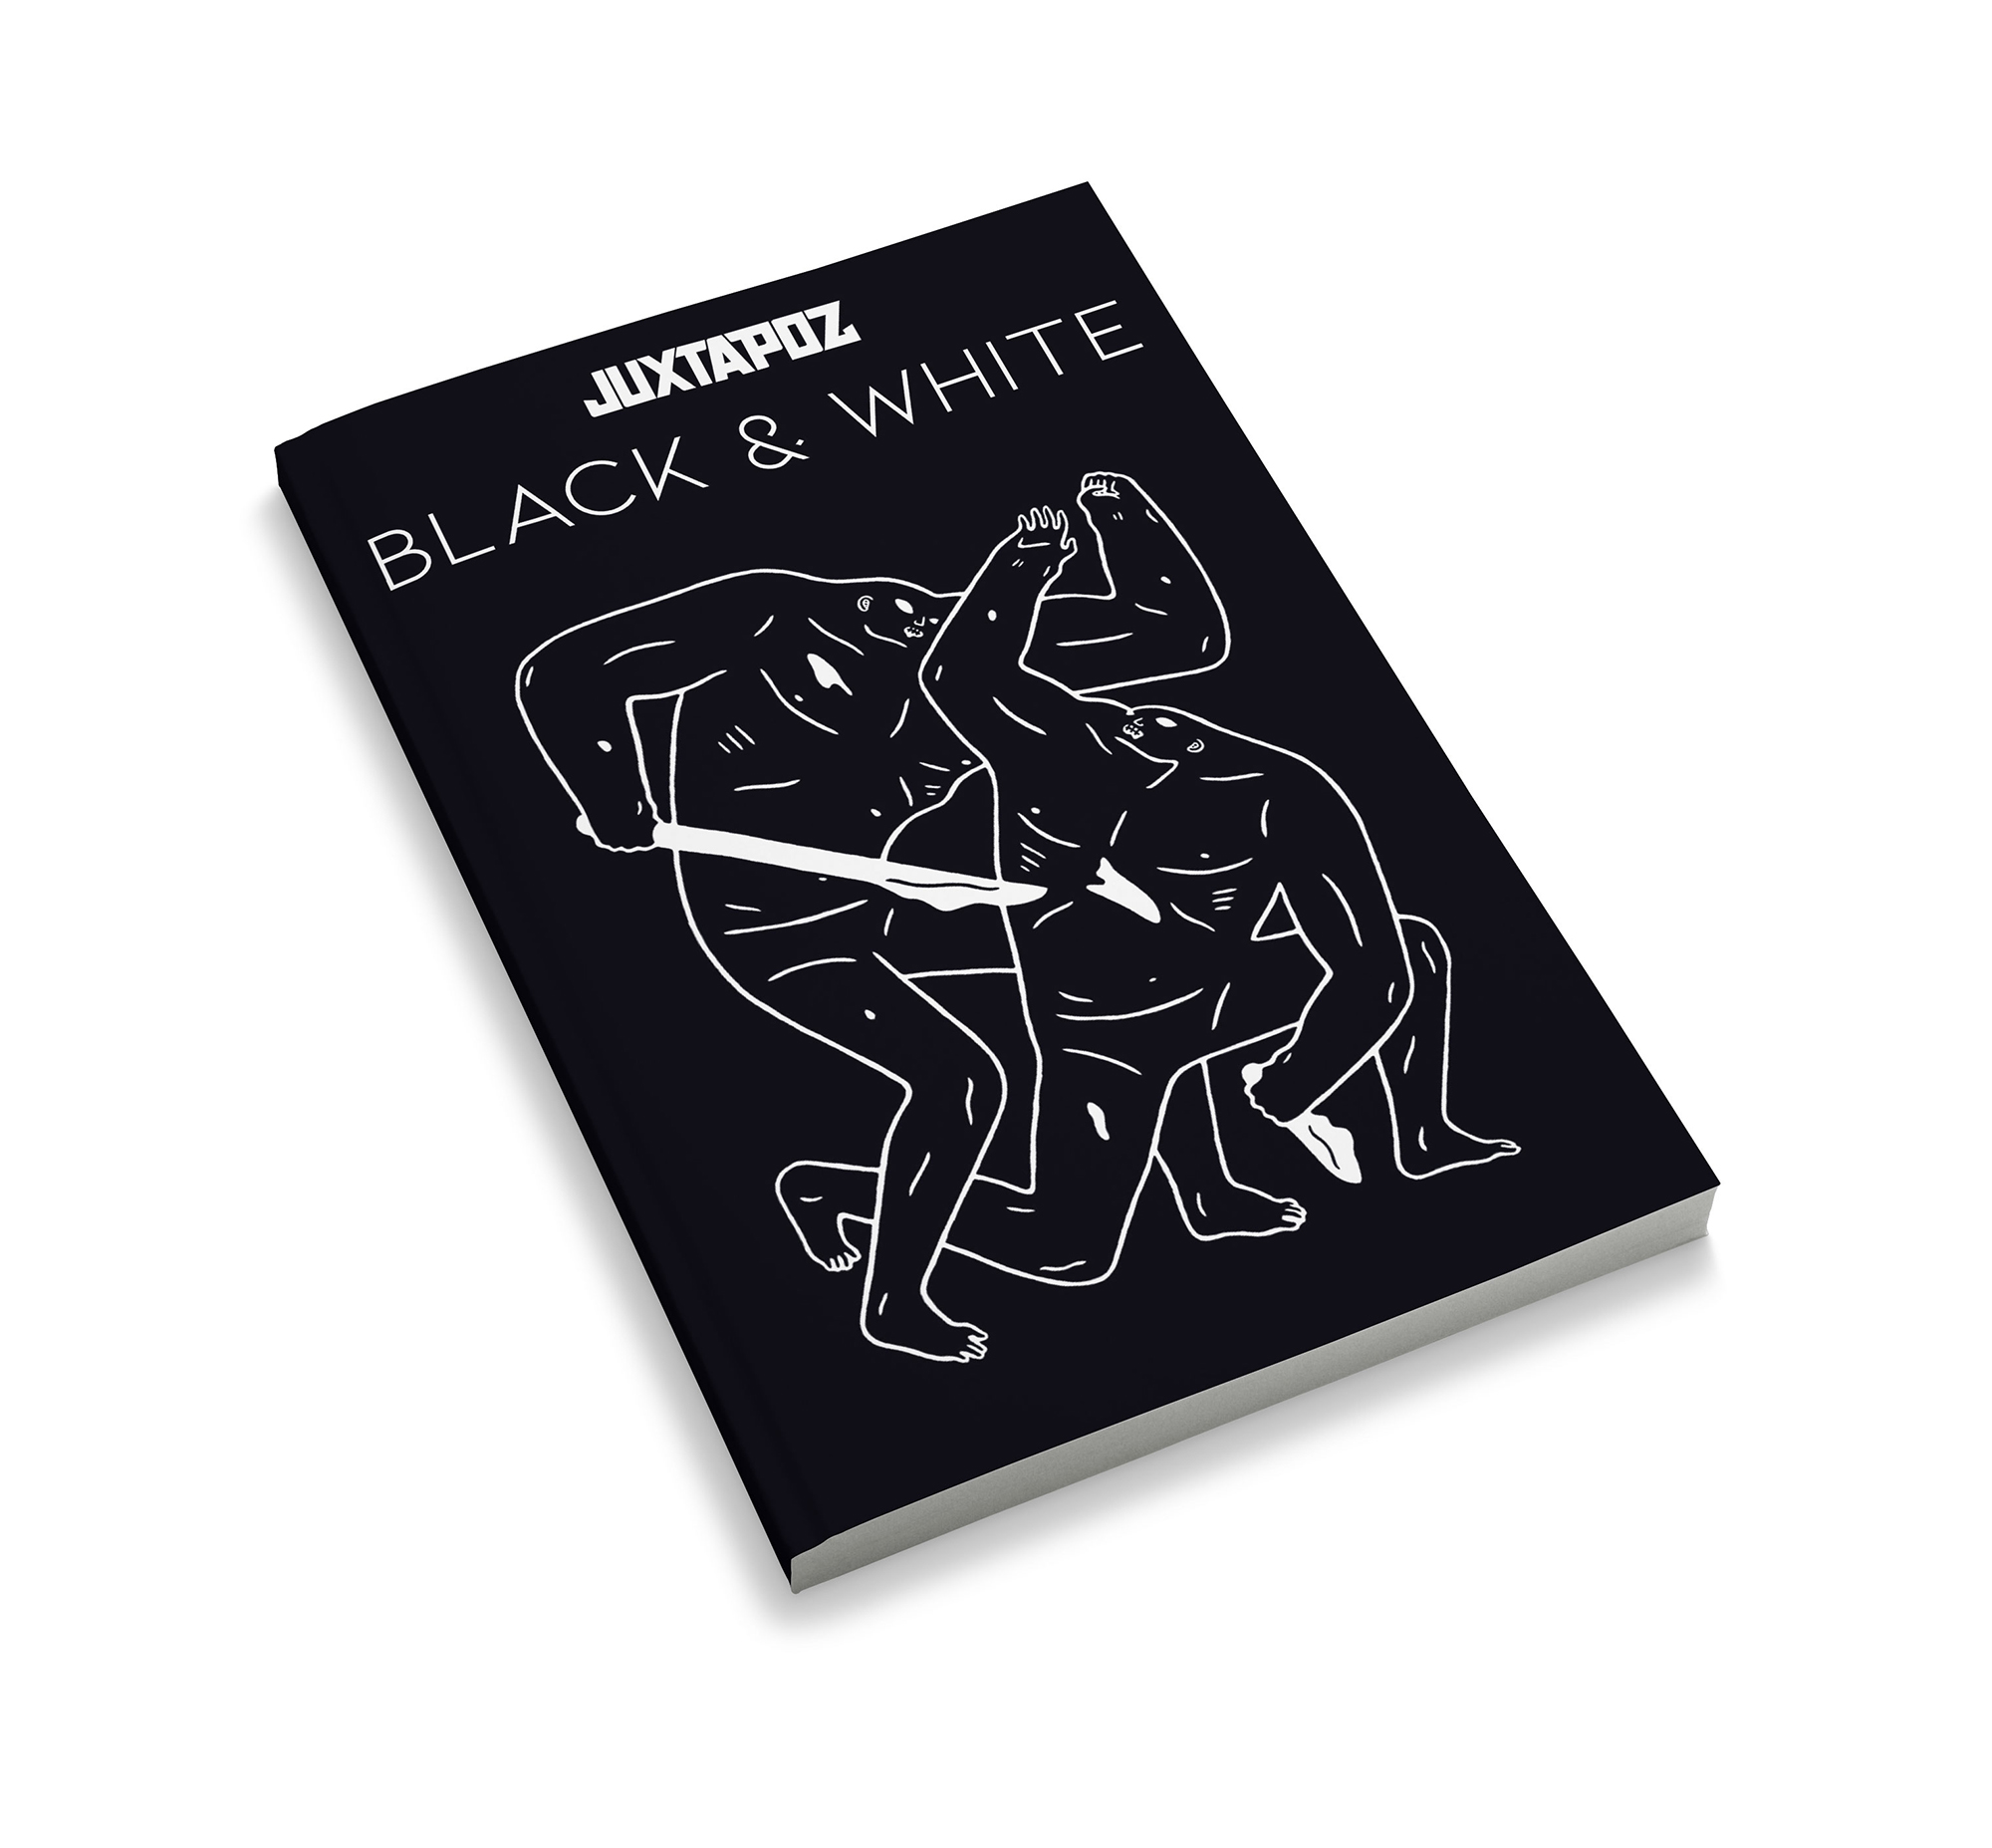 Cover art by Cleon Peterson